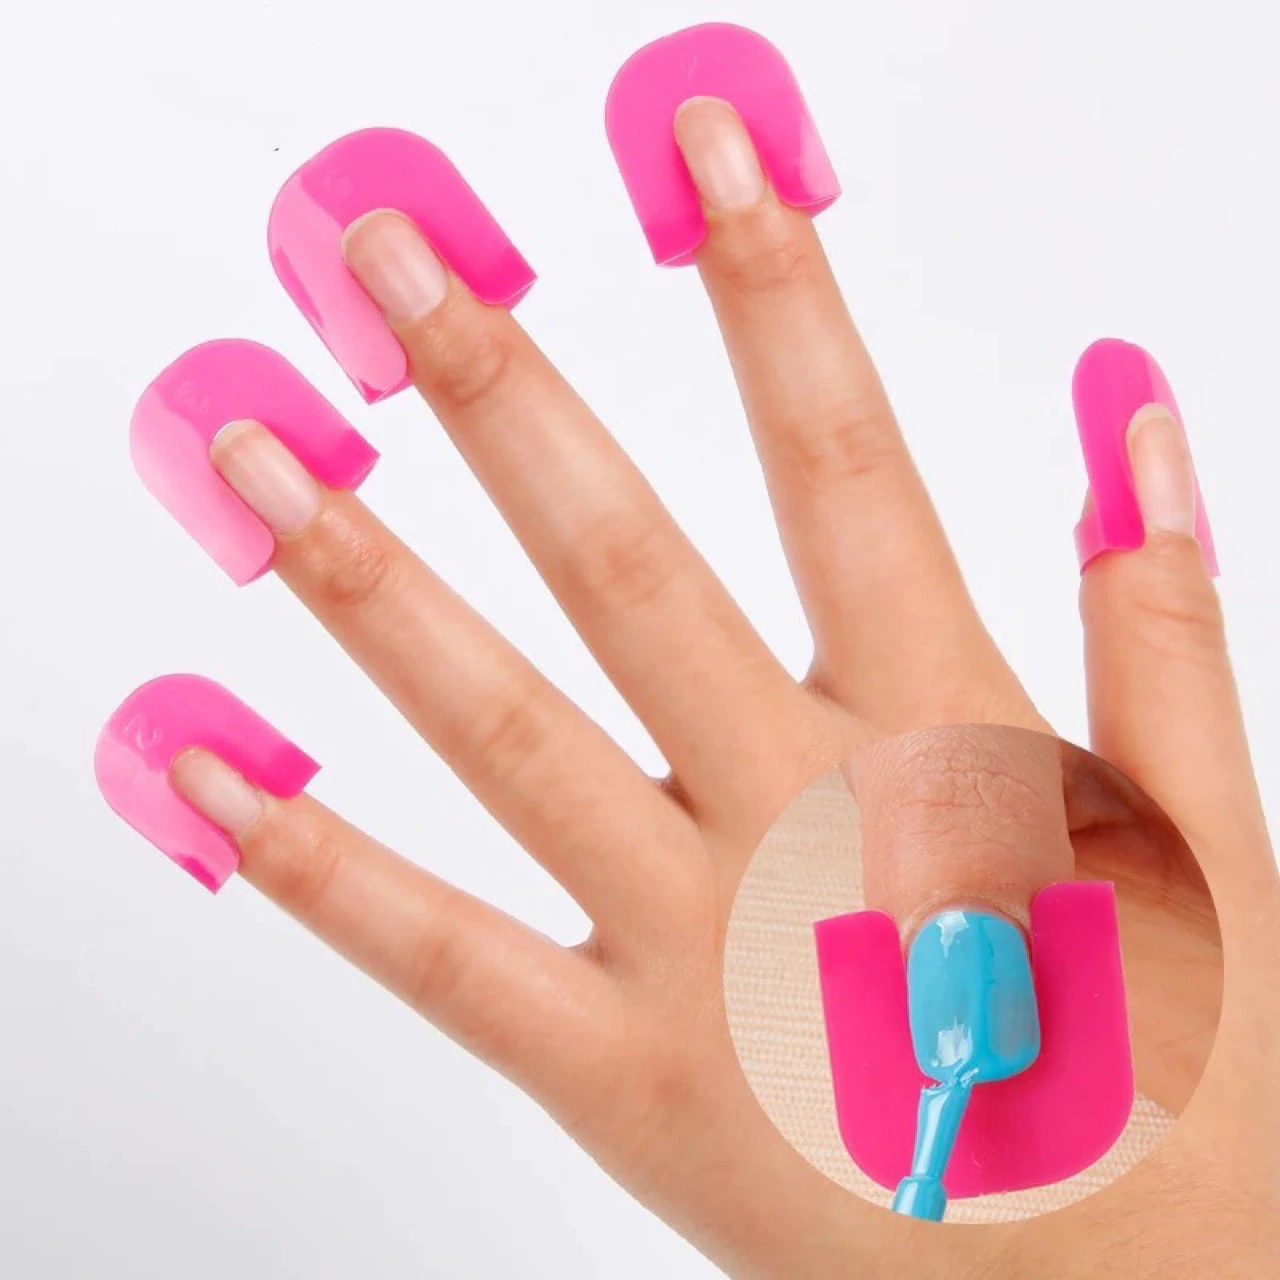 Overflow Prevention Clips for Manicure